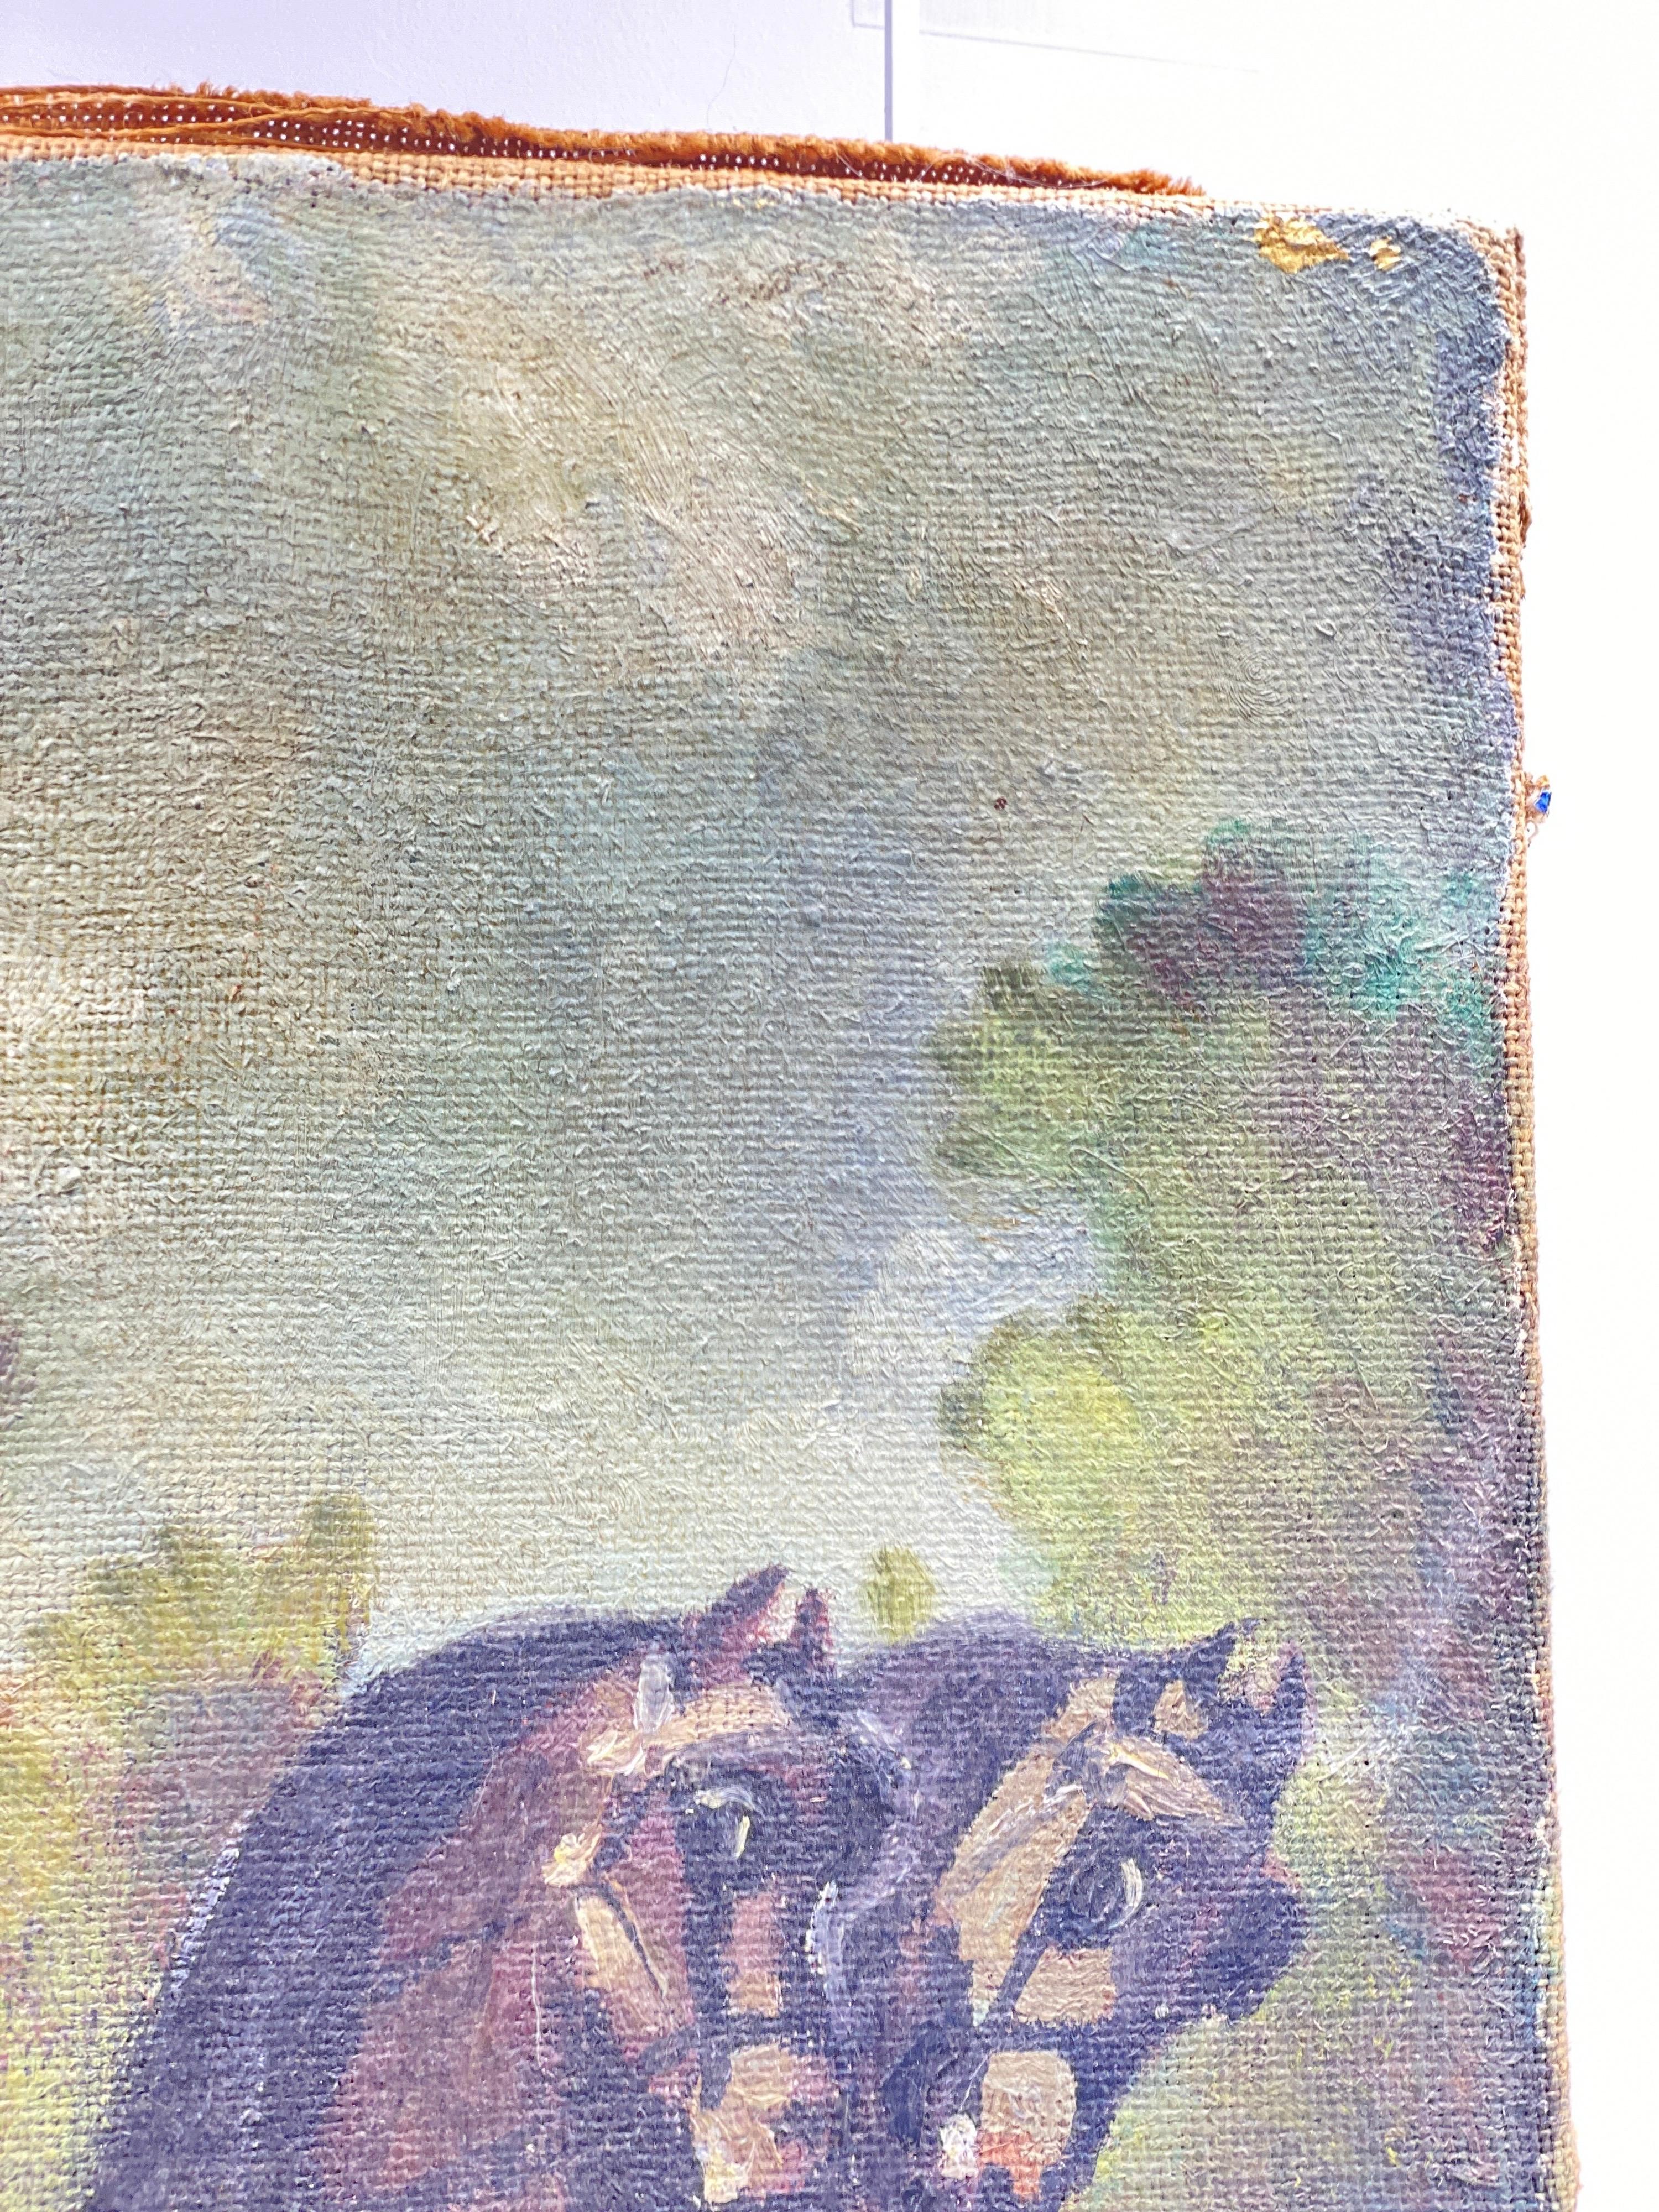 Original Oil Painting, a Couple in a Horse Team by French Painter Bousquet In Fair Condition For Sale In Auribeau sur Siagne, FR